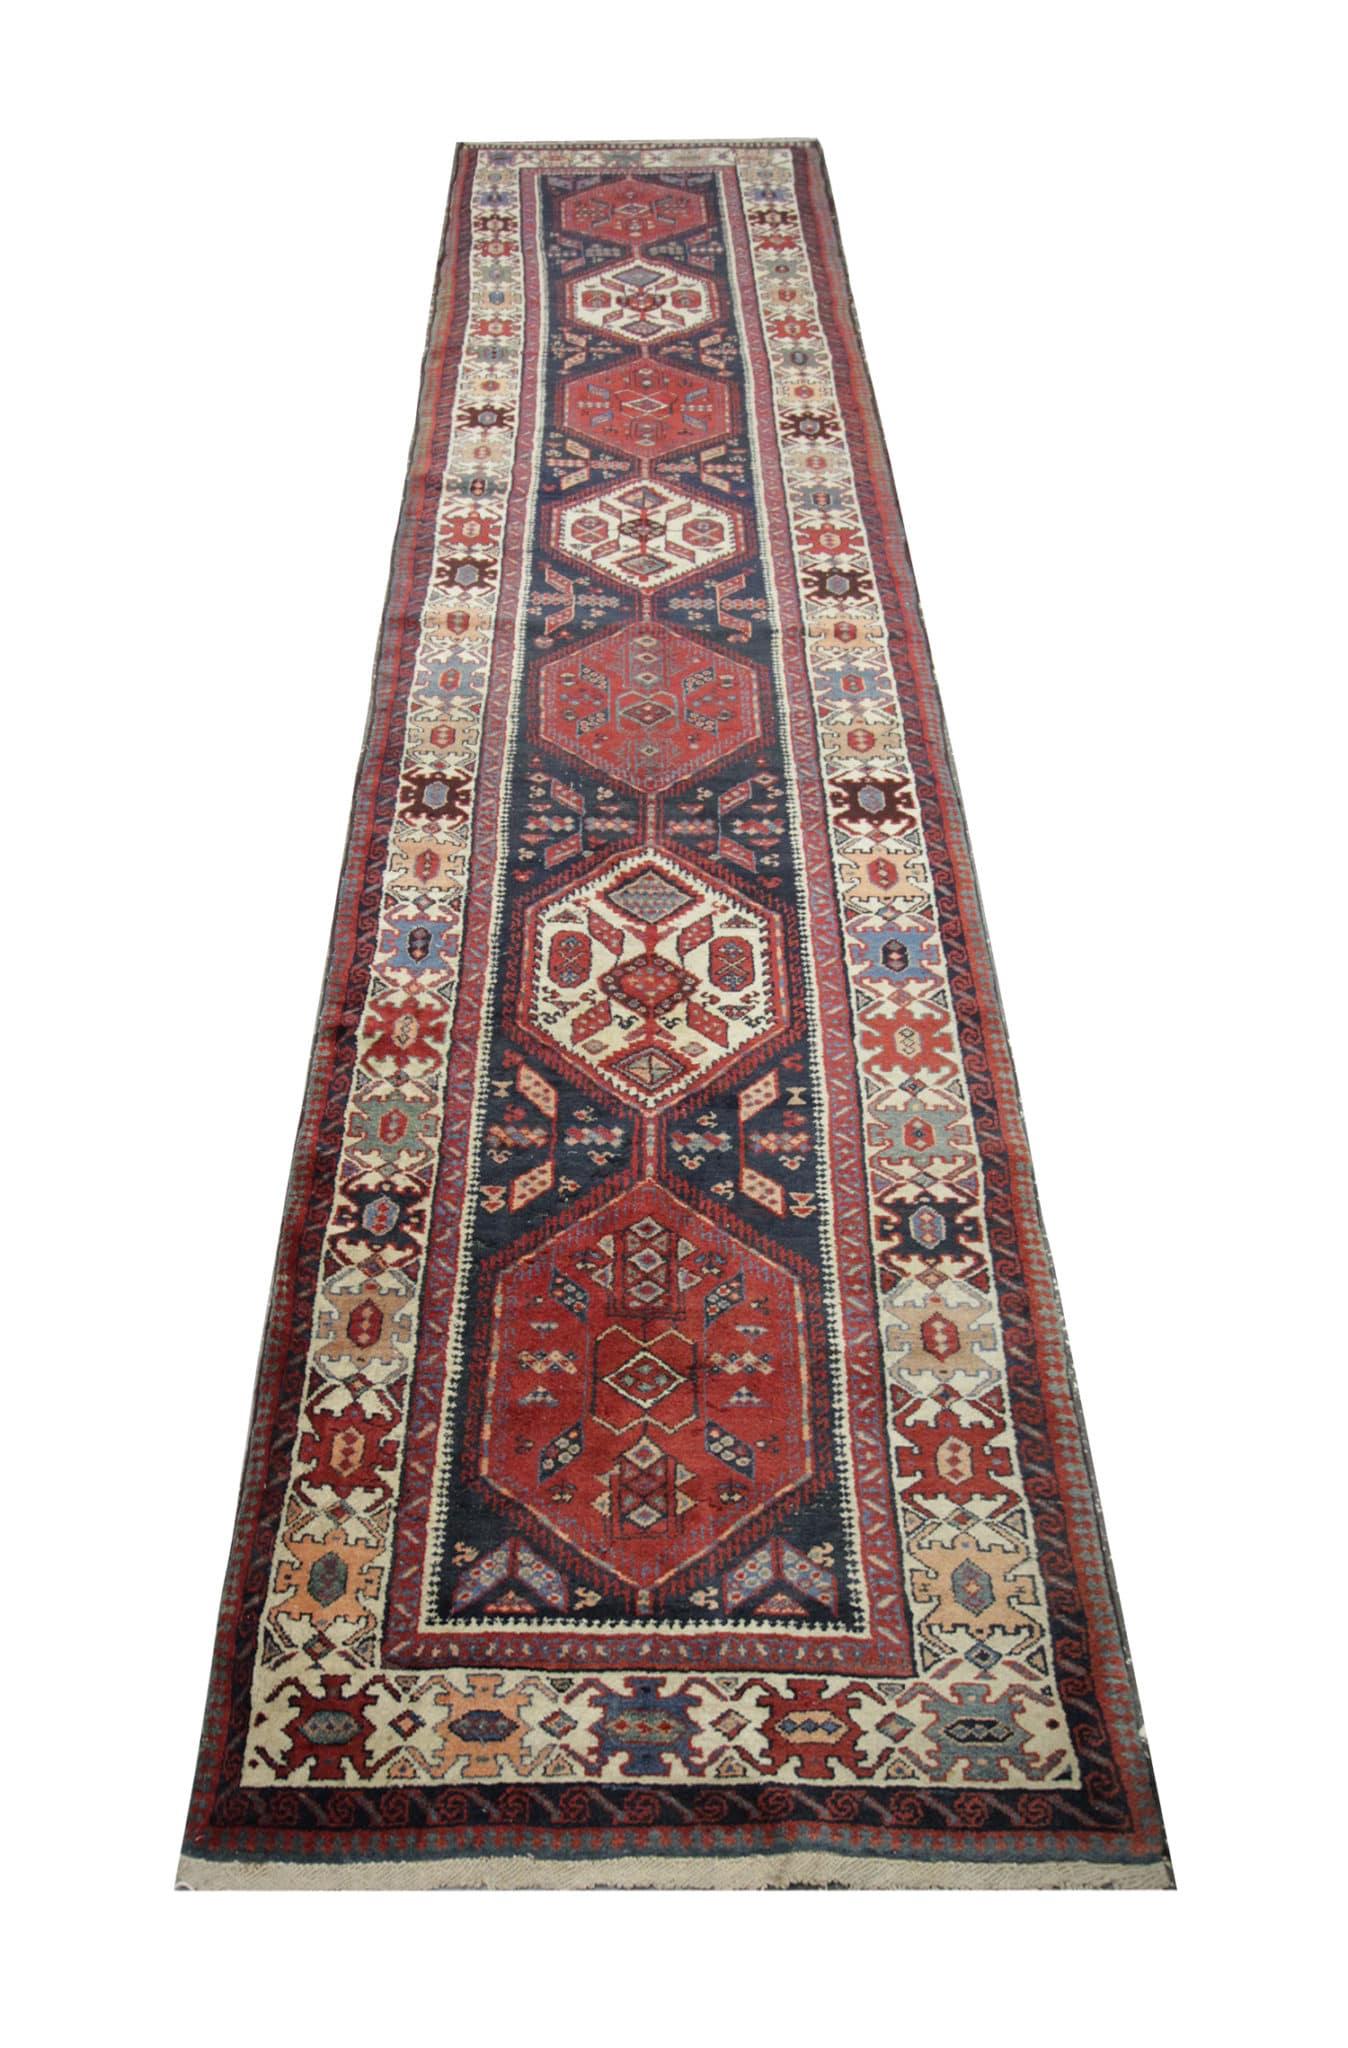 Vintage Runner Rug Handmade Carpet Geometric Ardebil tribal Stair Runner In Excellent Condition For Sale In Hampshire, GB